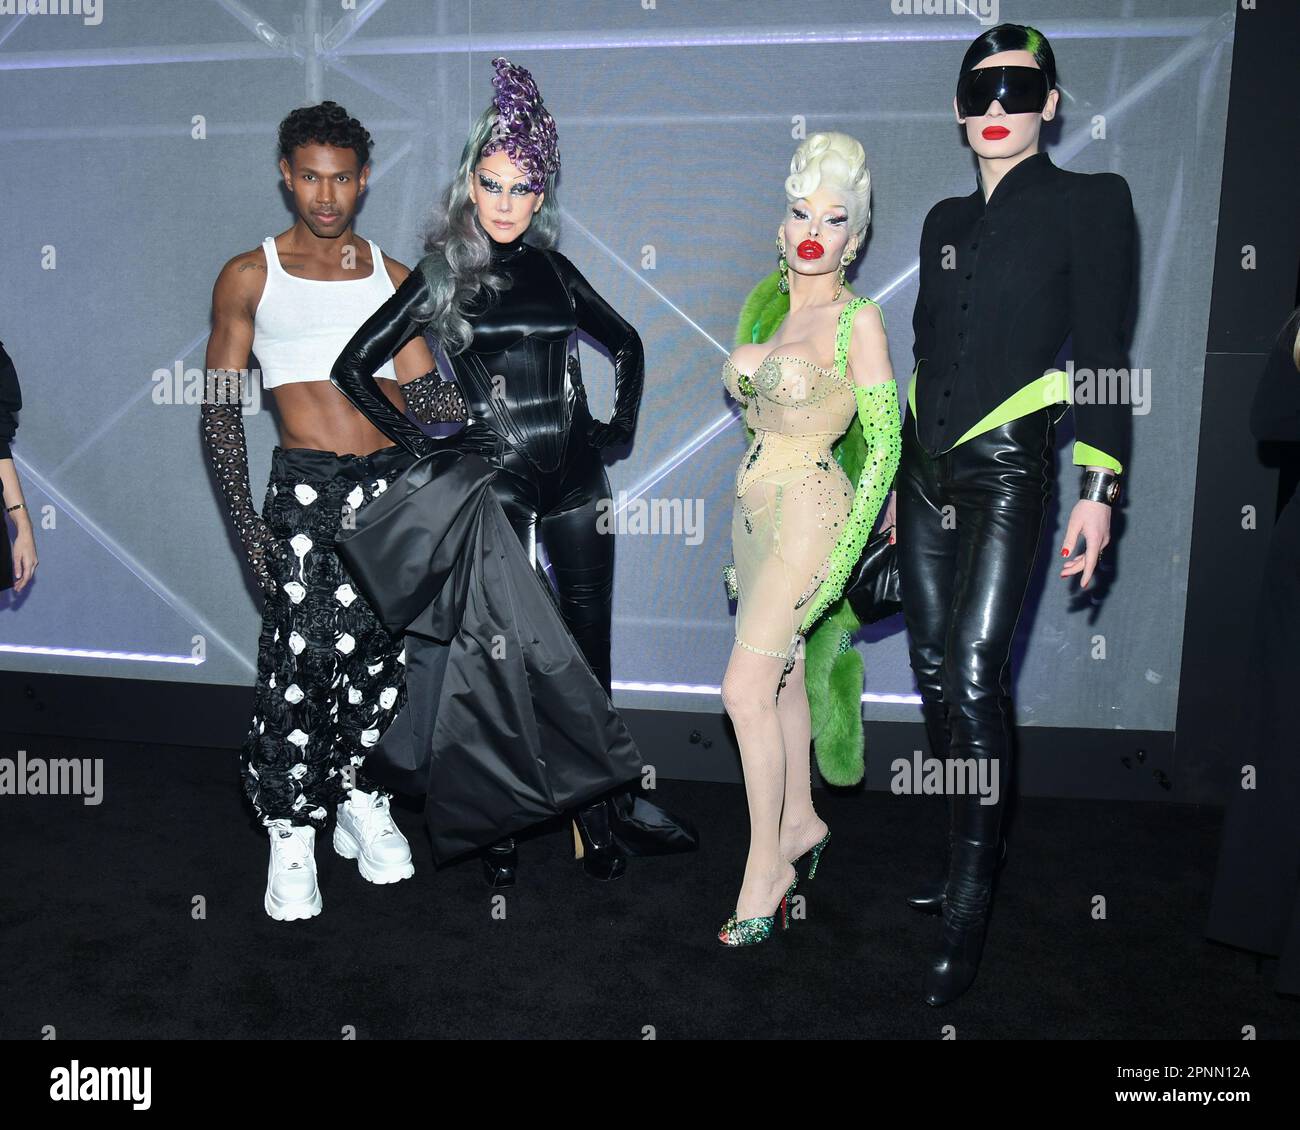 Susanne Bartsch (R), Amanda Lepore (2R) and guests Stock Photo